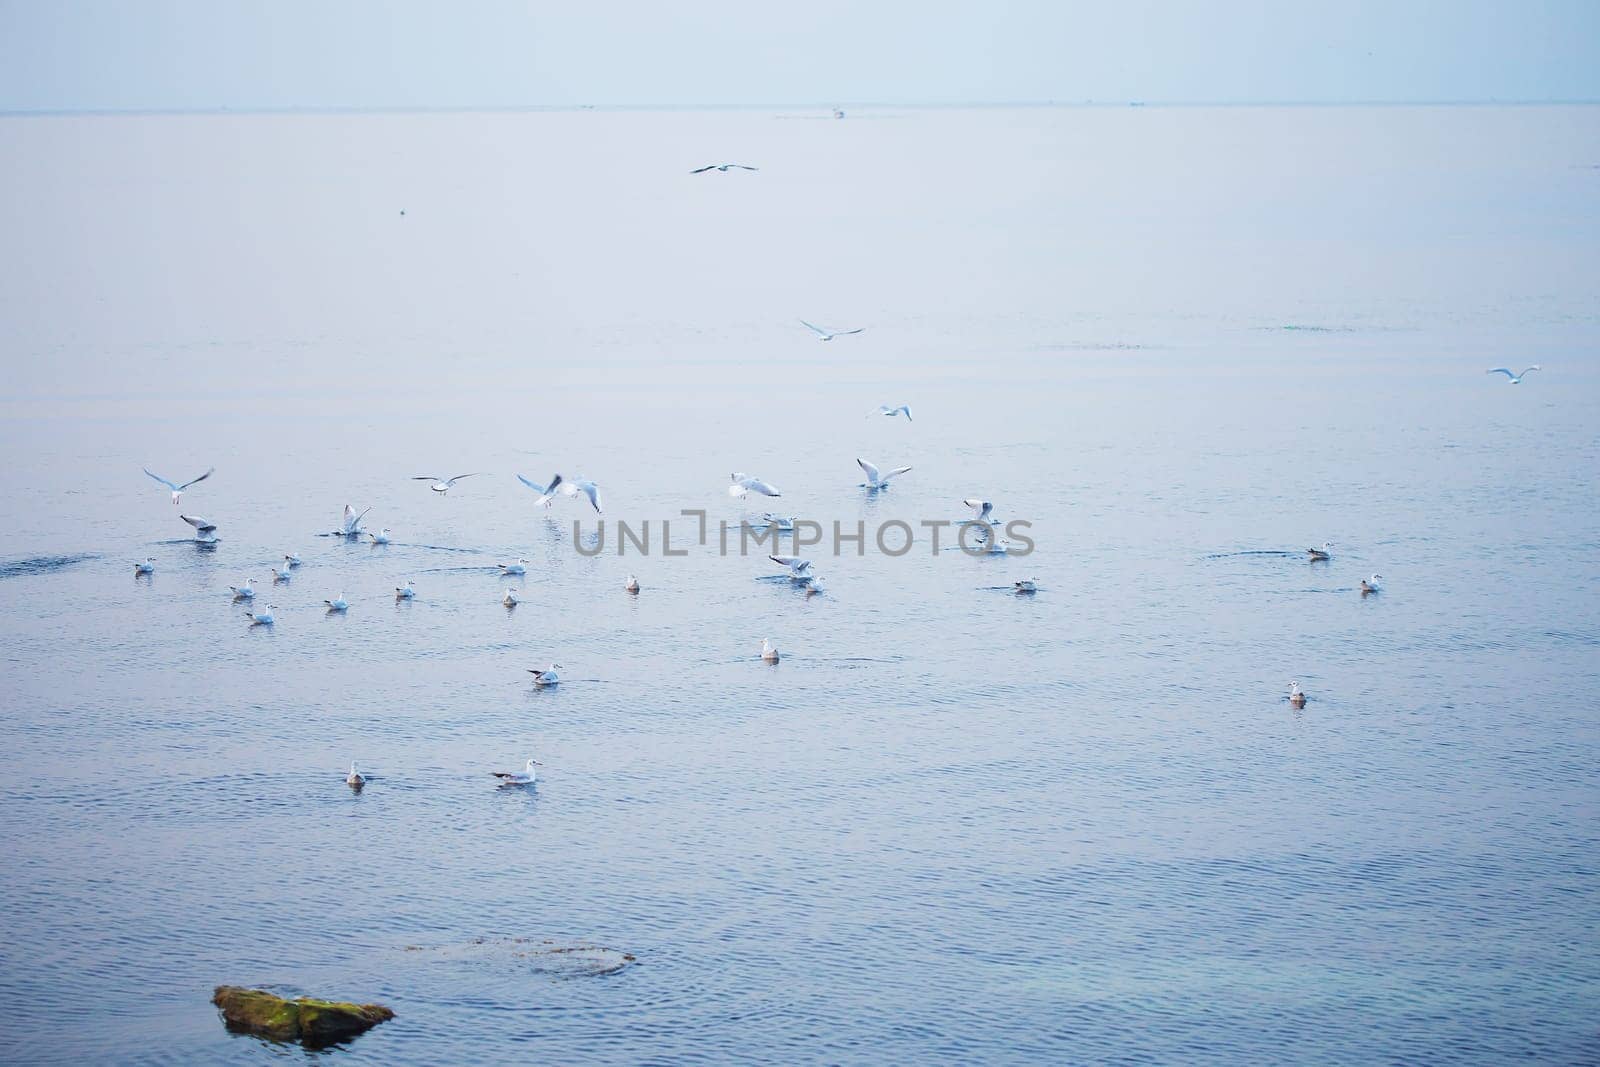 A flock of gulls takes off from the rocks near the sea.